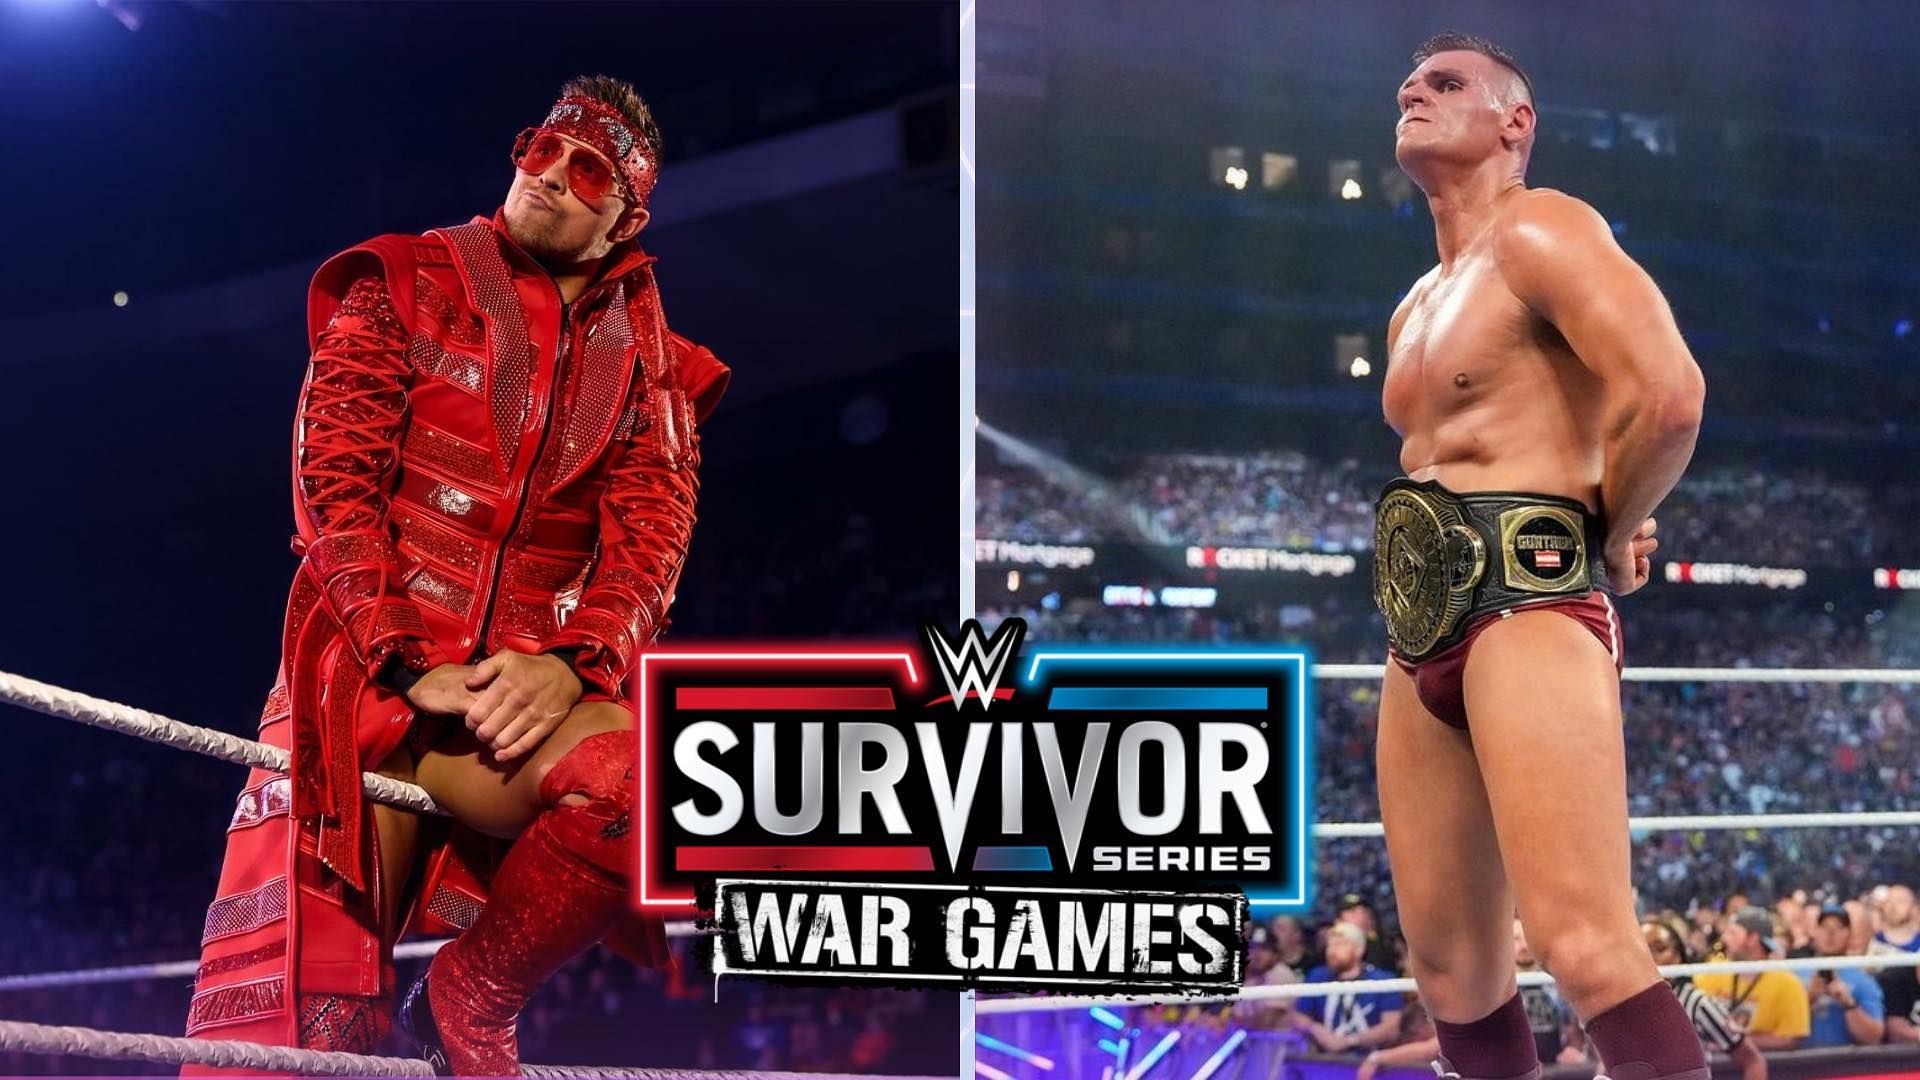 The Miz will face Gunther for his title at WWE Survivor Series.